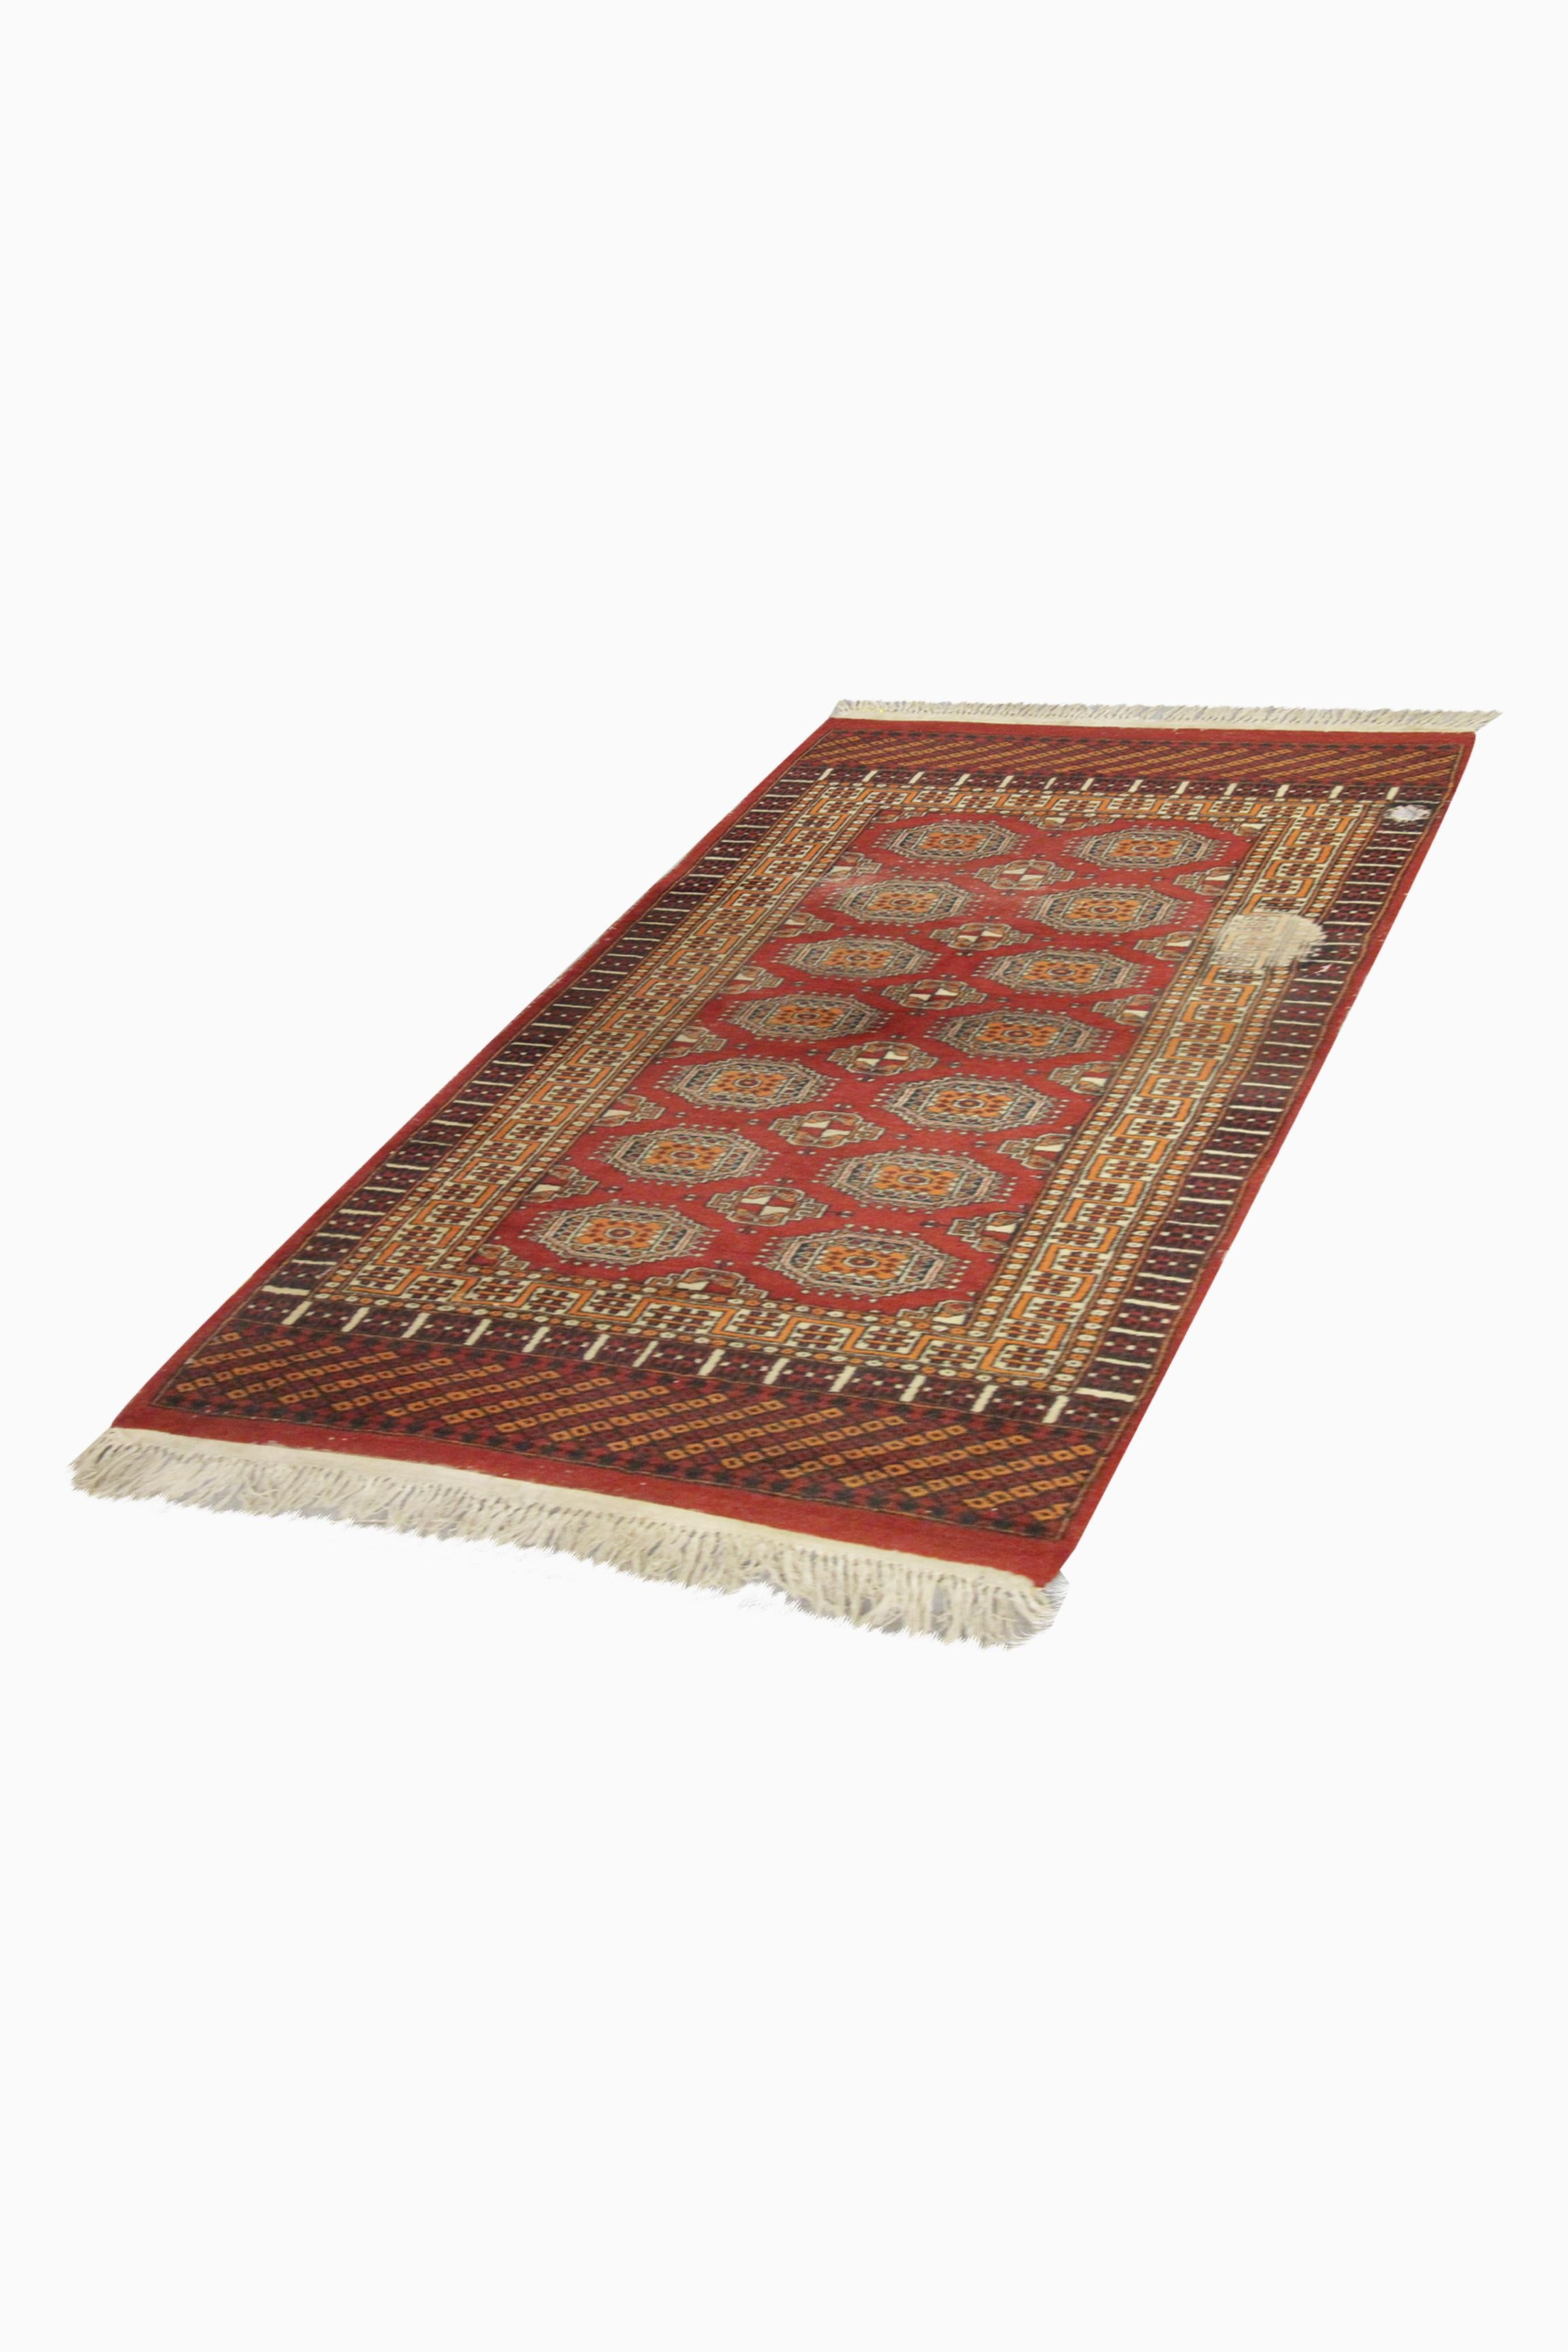 This beautiful red area rug is a fine example of handwoven Oriental rugs woven in the mid 20th century. The central design has been woven on a rich red background with black and beige accents that make up the decorative geometric design. This has